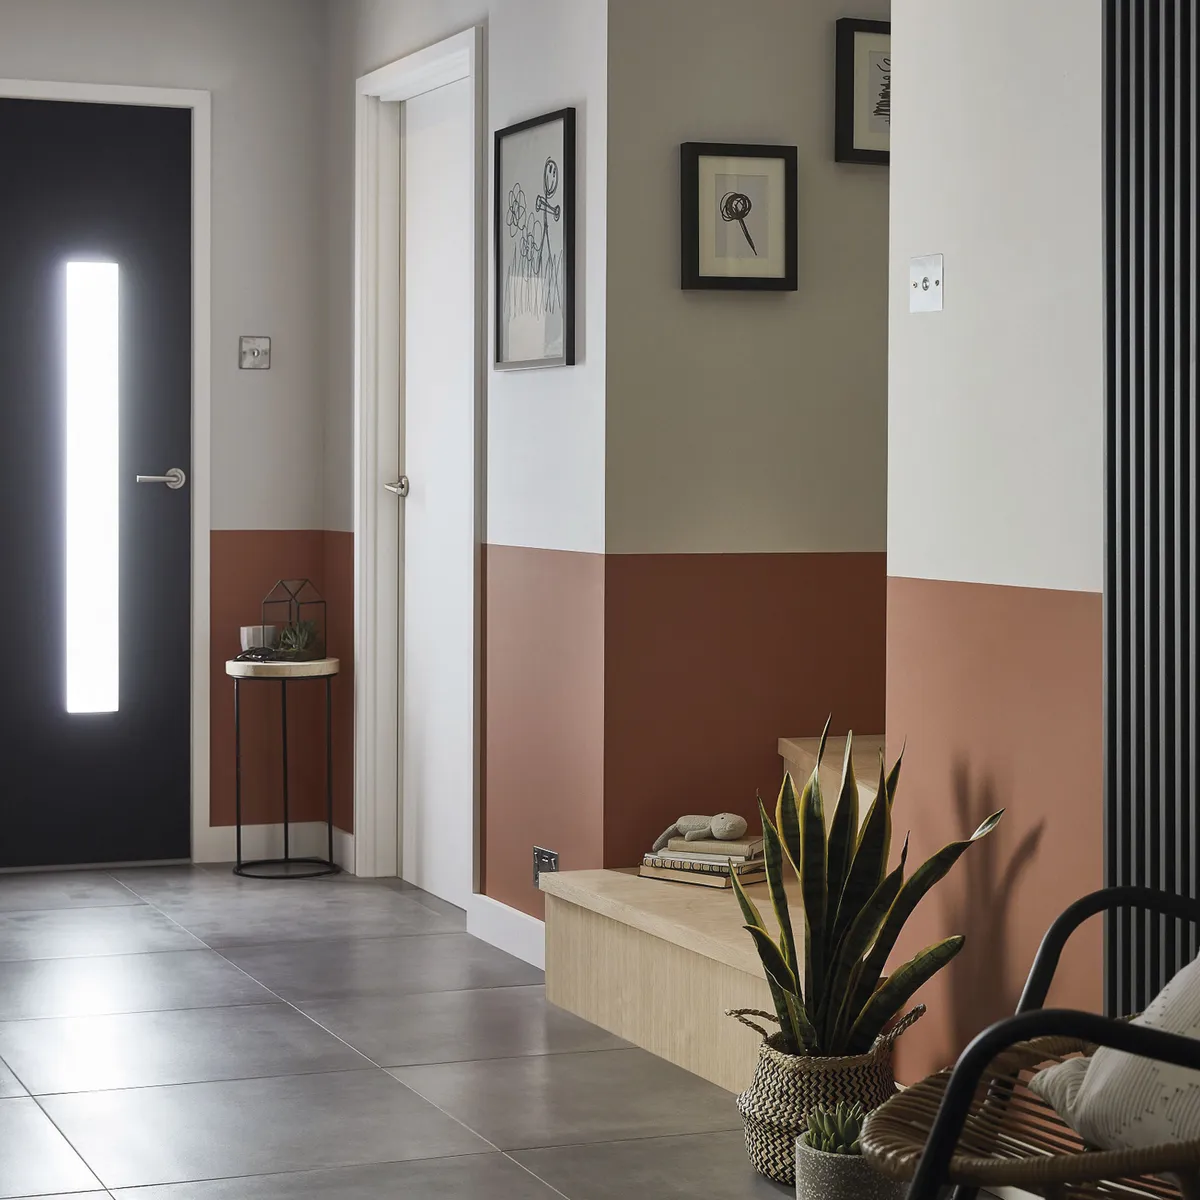 GoodHome paint in Hempstead, £16 for 2.5l; GoodHome paint in Pimlico, £16 for 2.5l; konkrete anthracite porcelain floor tile, £15.20 per sq m; GoodHome kensal vertical anthracite radiator, £180; GoodHome brushed chrome recessed downlights, £23 for three, all B&Q